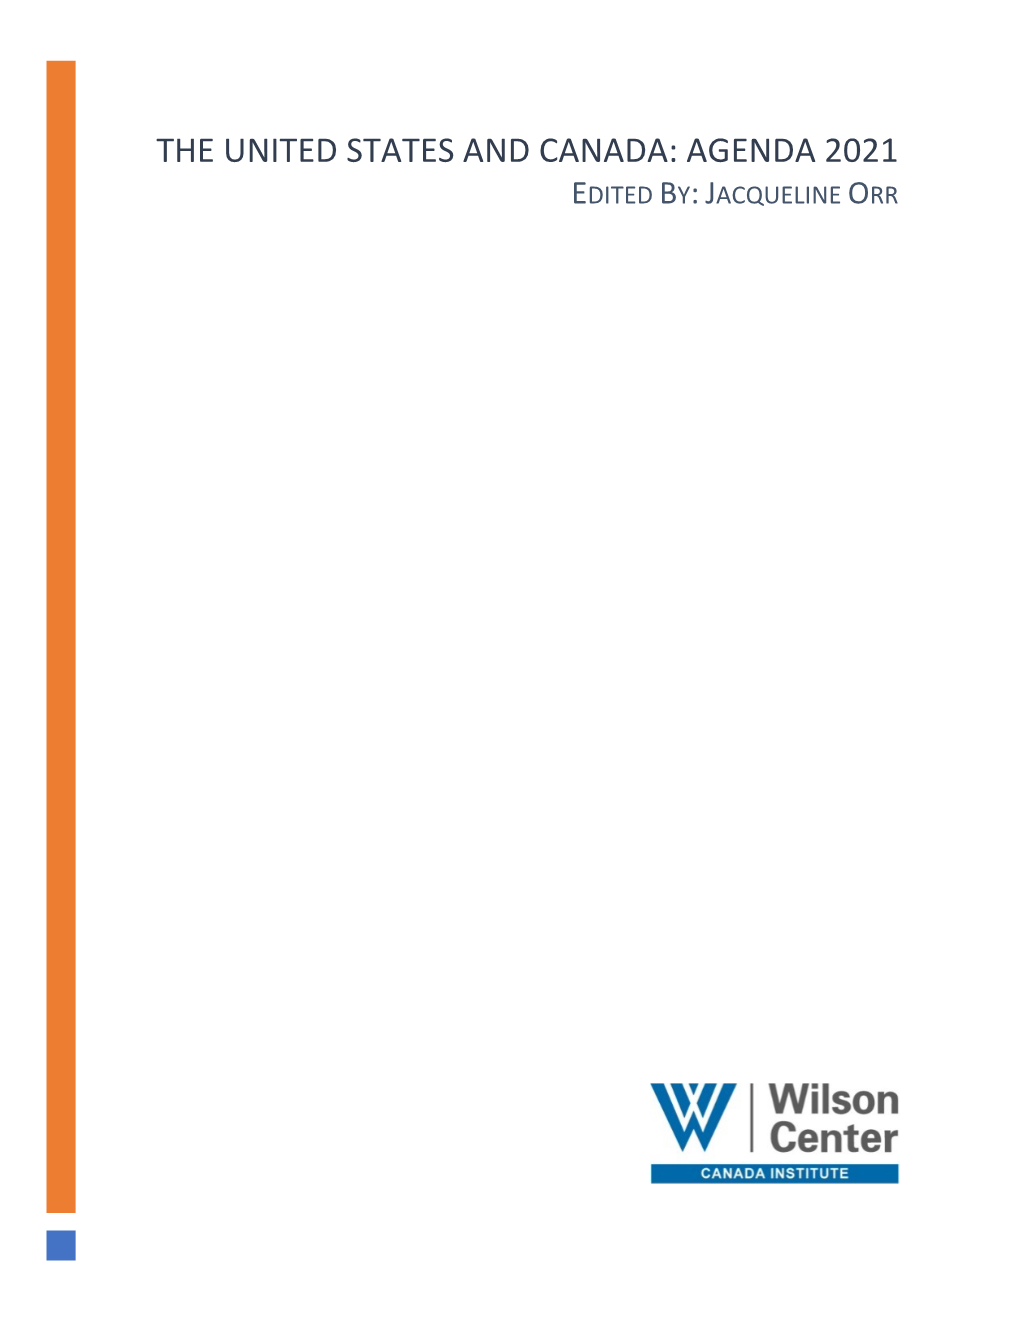 THE UNITED STATES and CANADA: AGENDA 2021 EDITED BY: JACQUELINE ORR Table of Contents INTRODUCTION